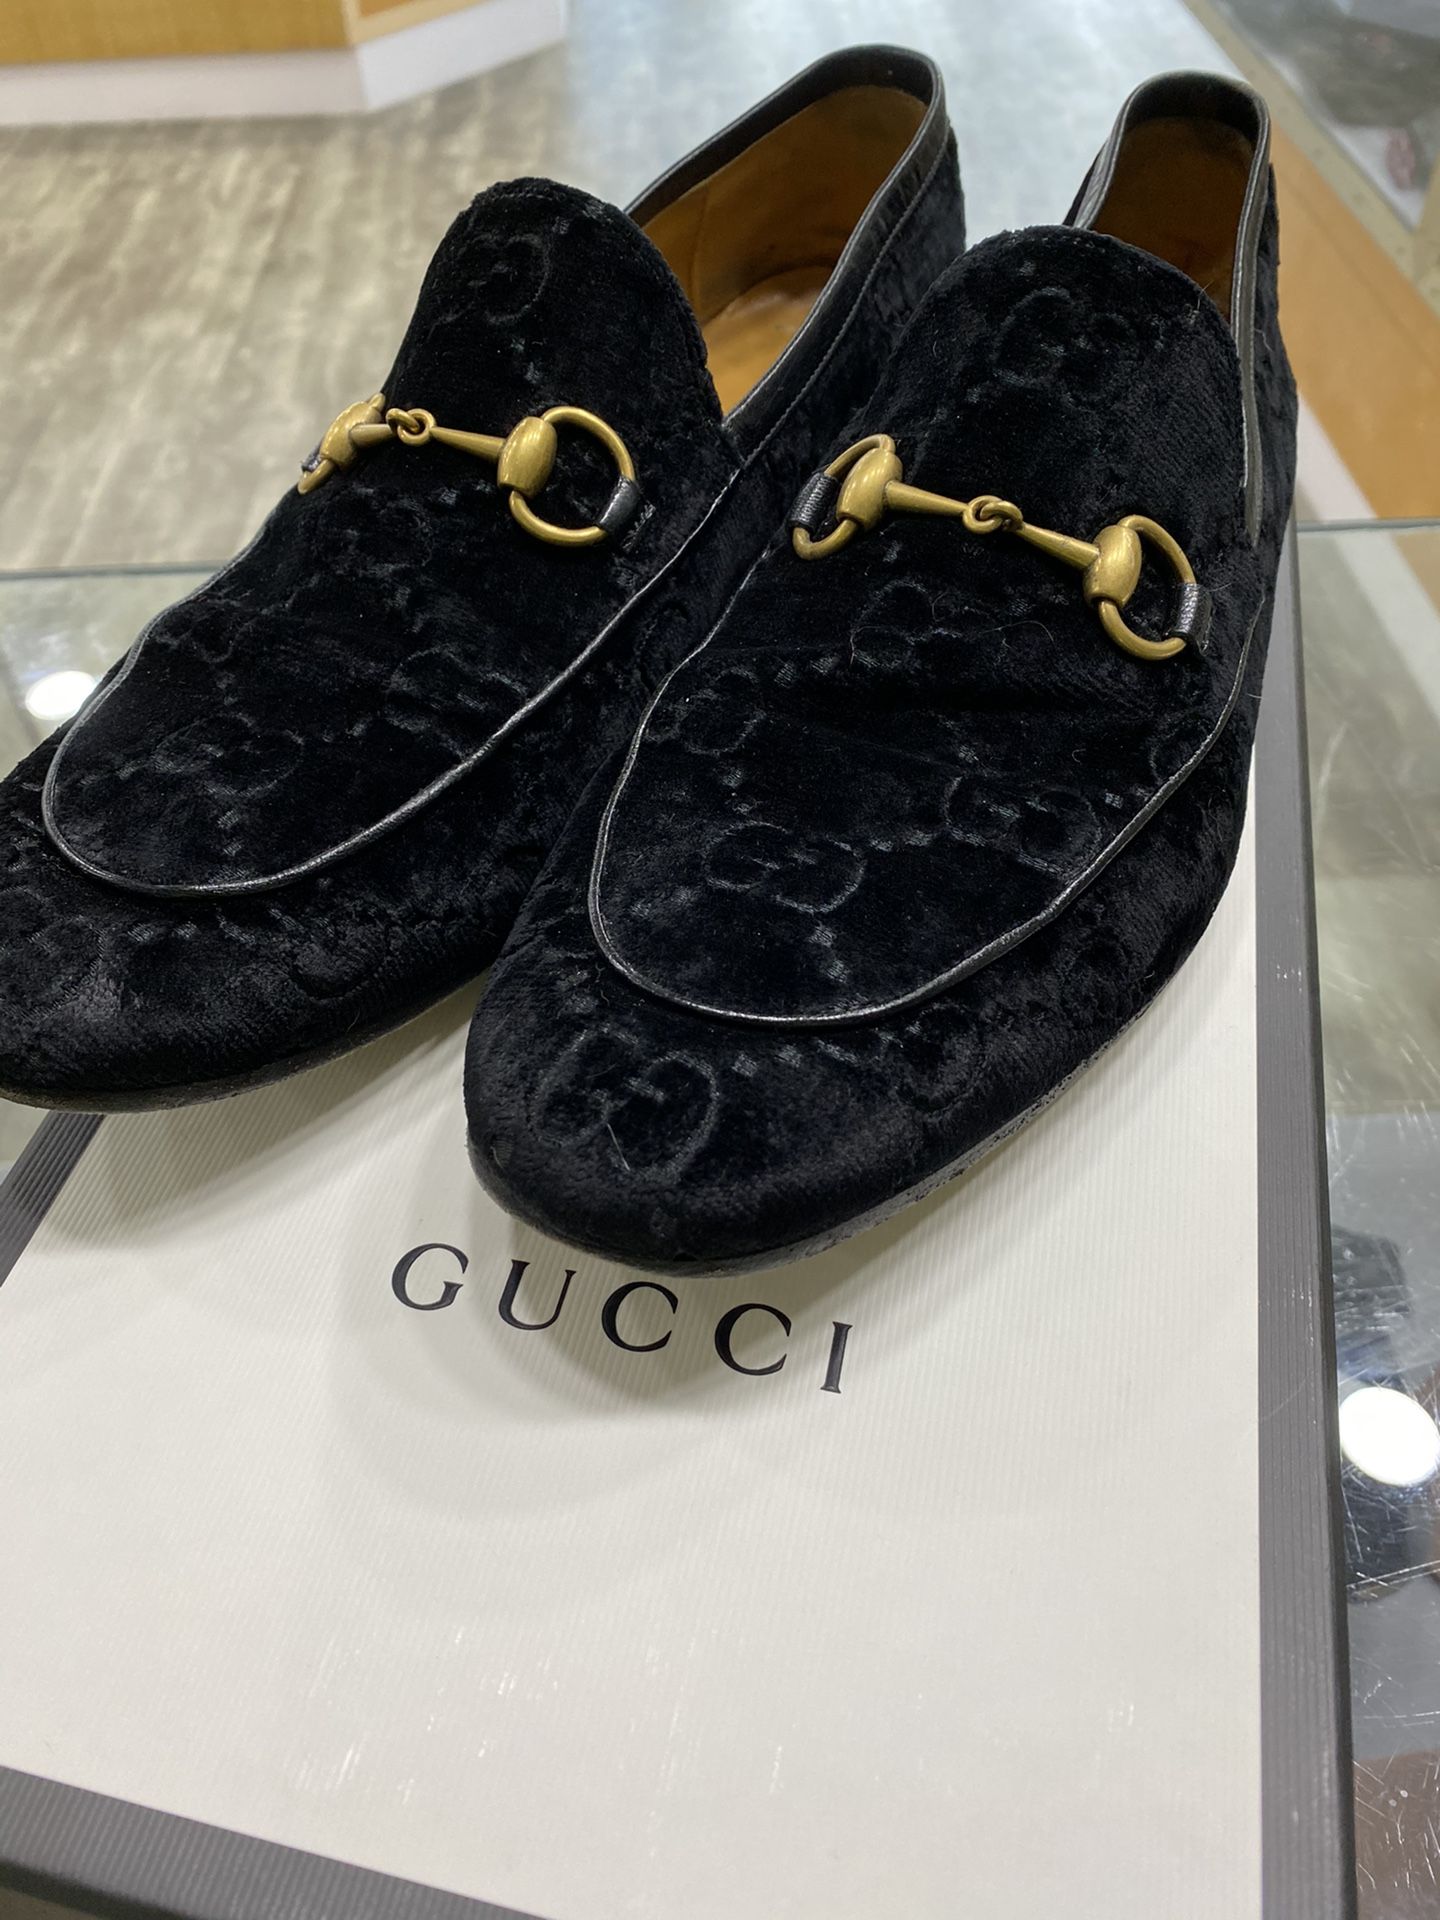 Gucci velvet loafers size 10.5